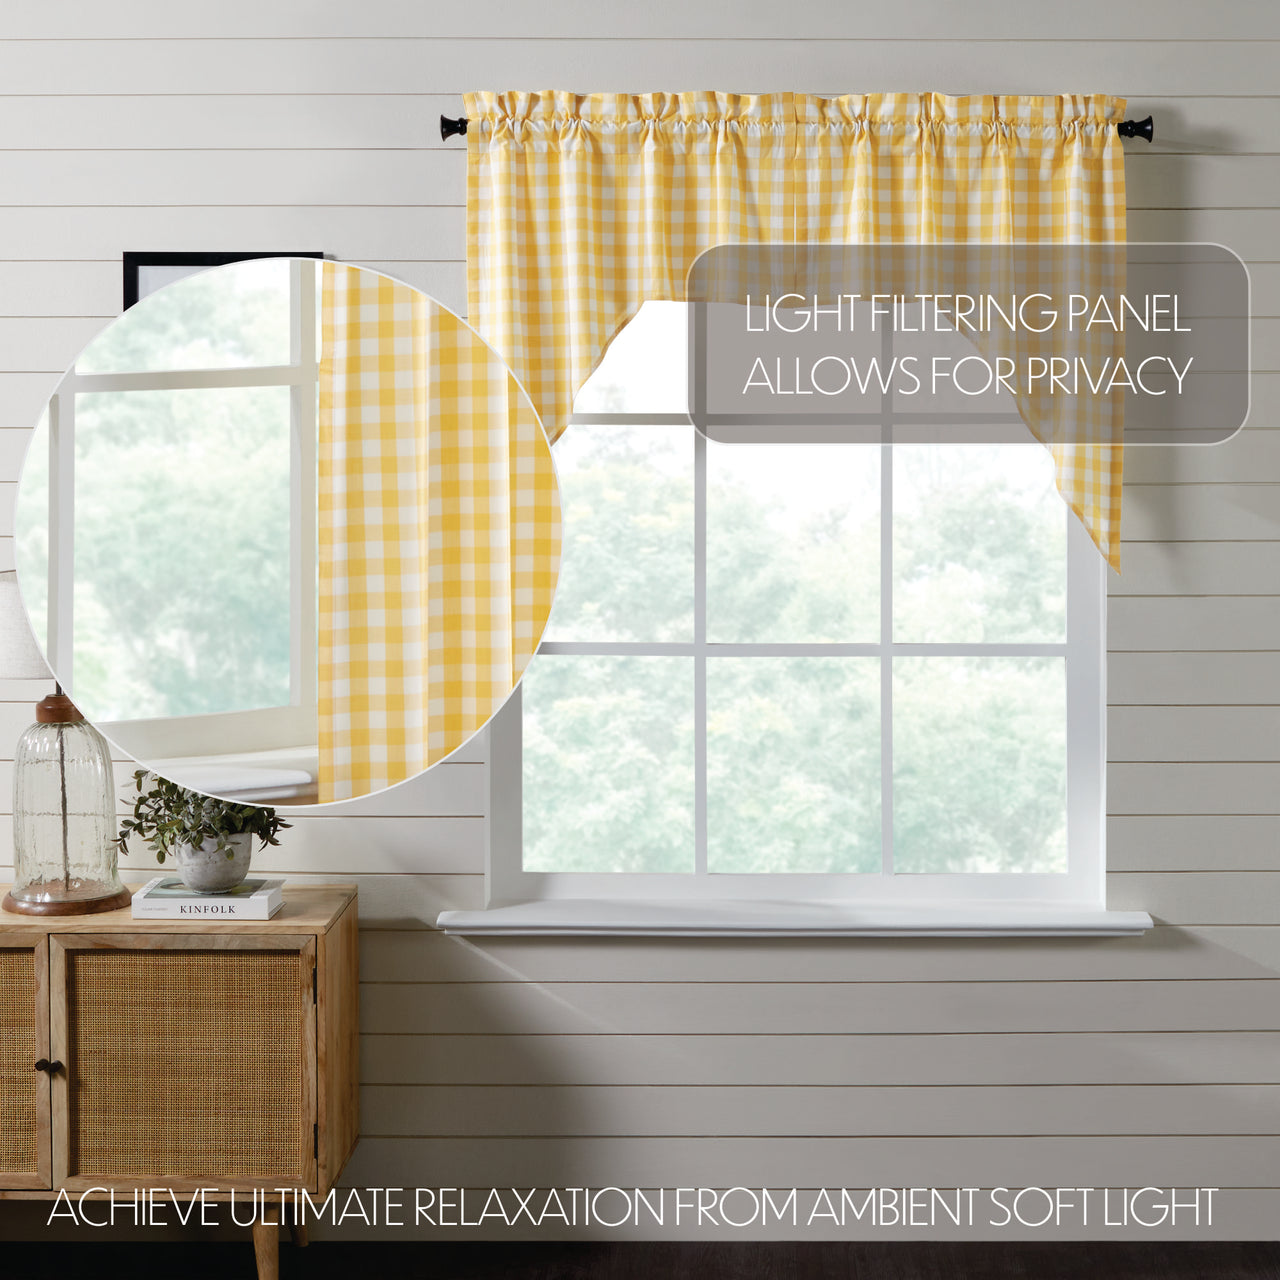 Annie Buffalo Yellow Check Swag Curtain Set of 2 36x36x16 VHC Brands